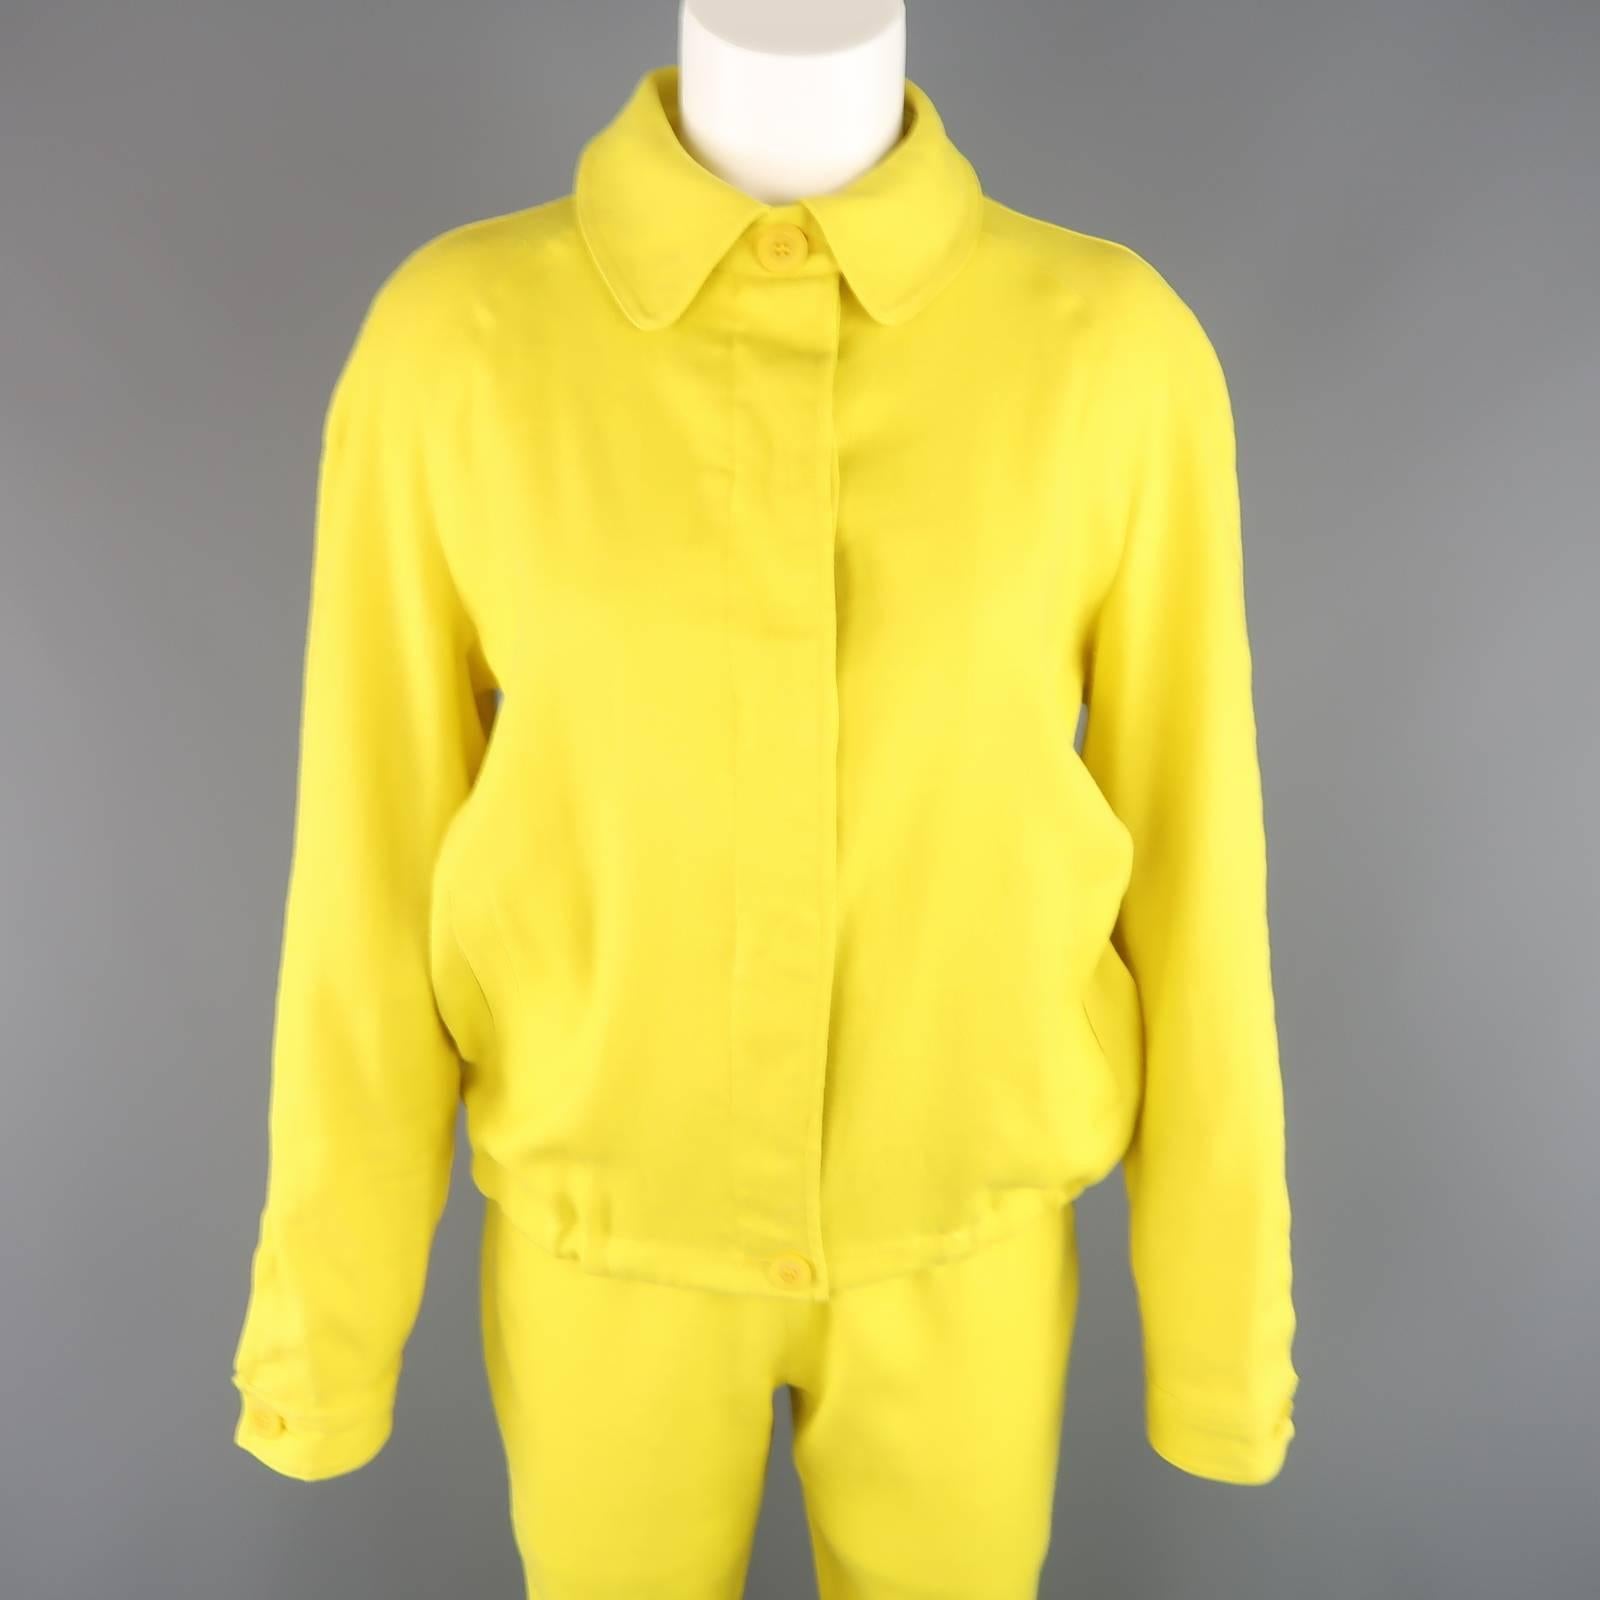 Vintage GIANFRANCO FERRE JEANS outfit comes in a bold yellow linen blend fabric and includes a collared, hidden placket button closure, drawstring jacket and matching capri pants. Made in Italy.
 
Good Pre-Owned Condition.
Marked: 44
